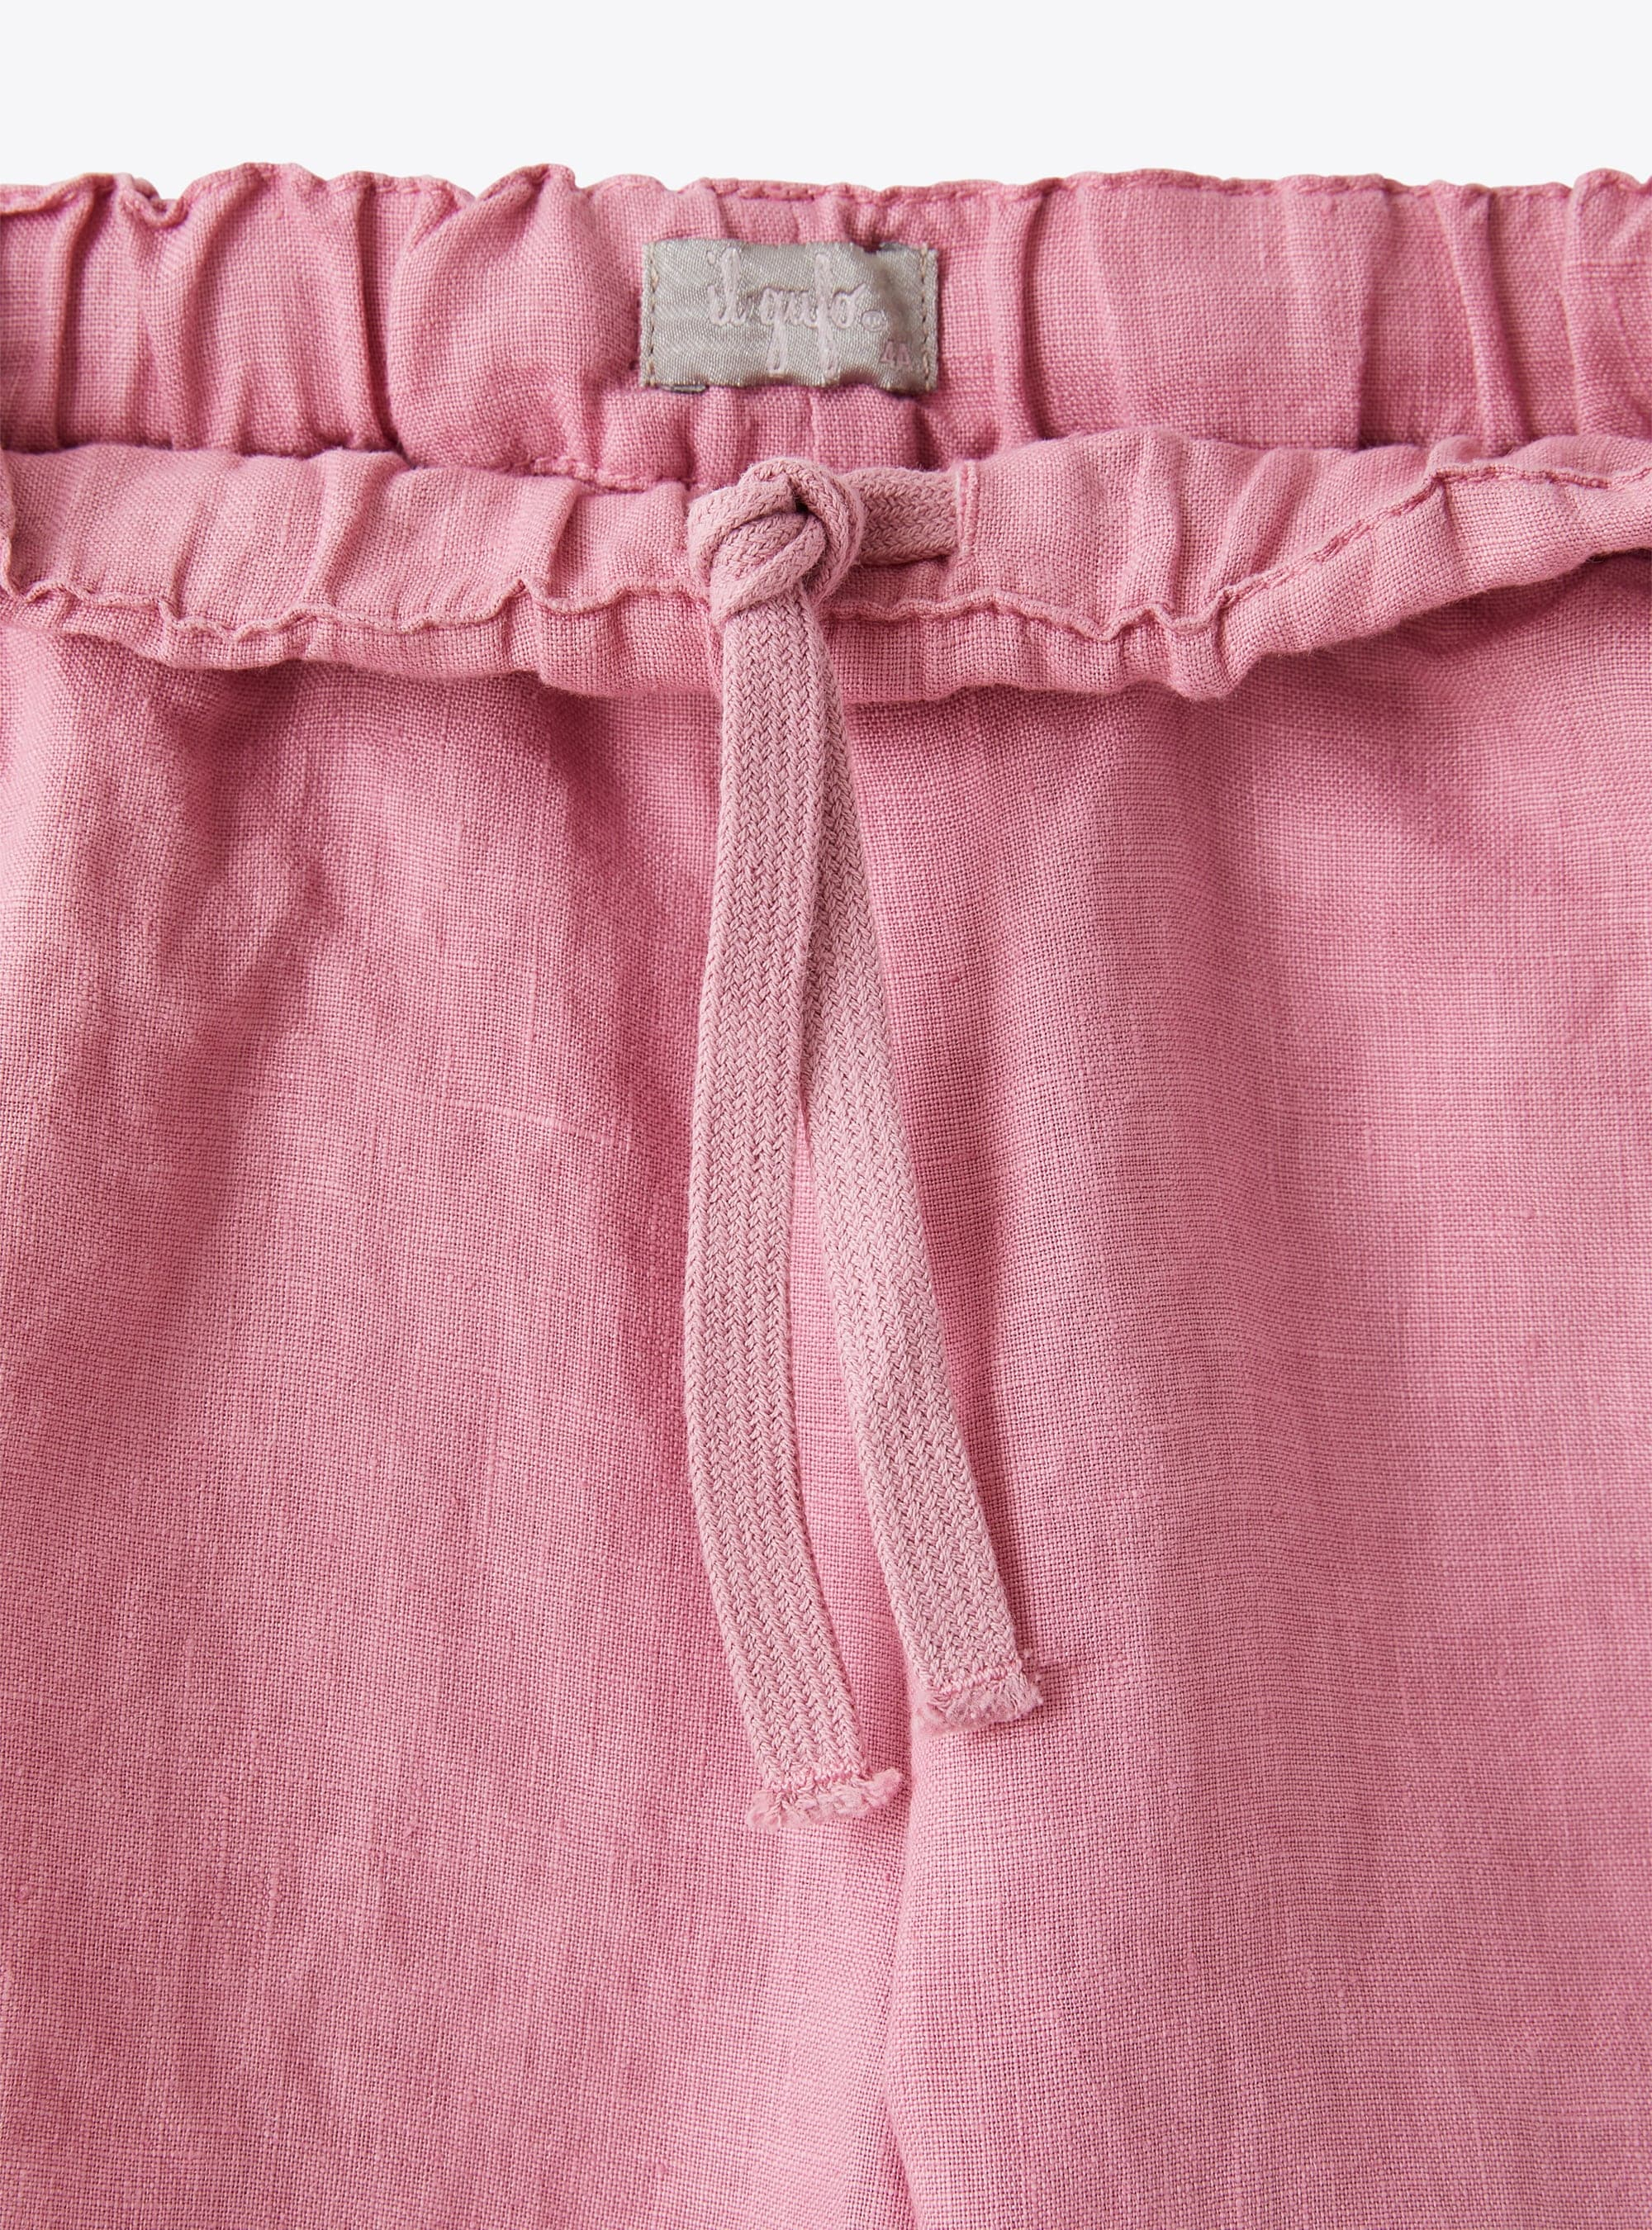 Long drawstring trousers in pink linen - Pink | Il Gufo